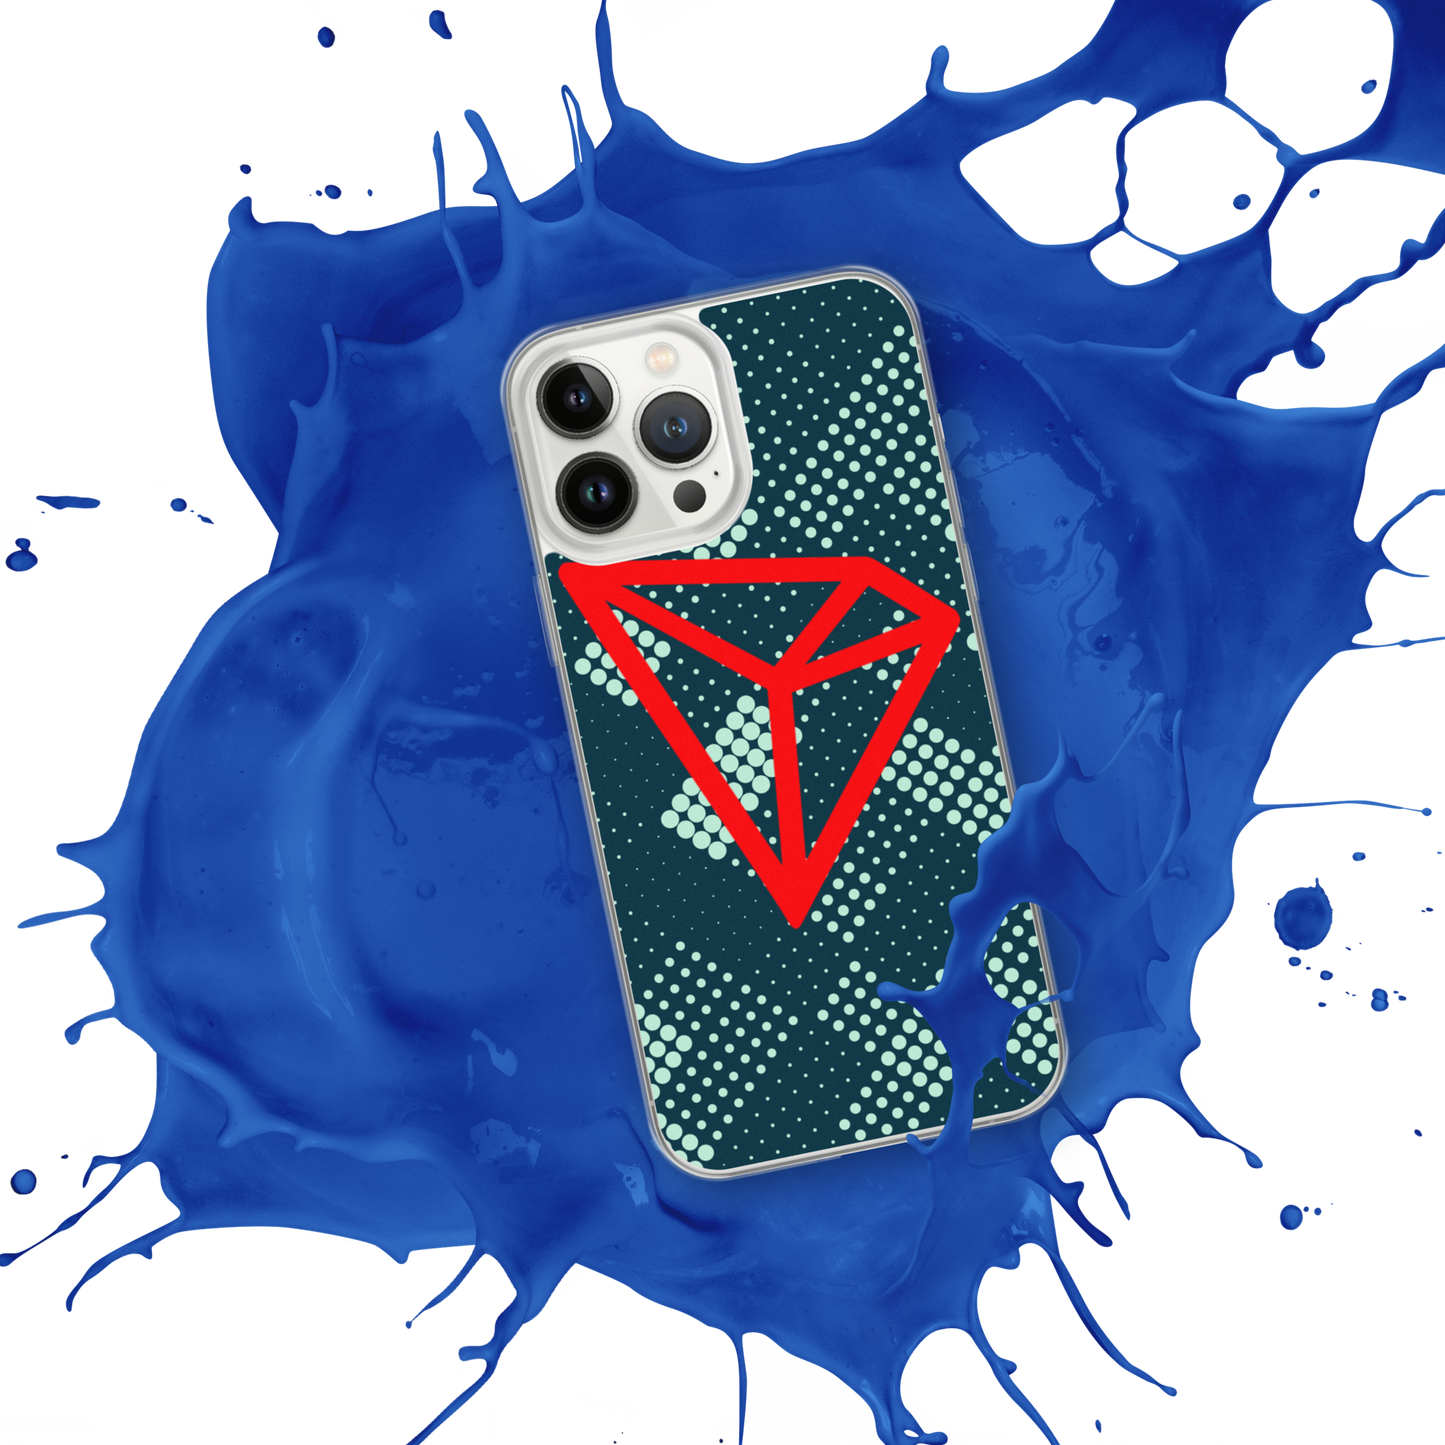 Tron Abstract 24 Crypto TRX iPhone Case